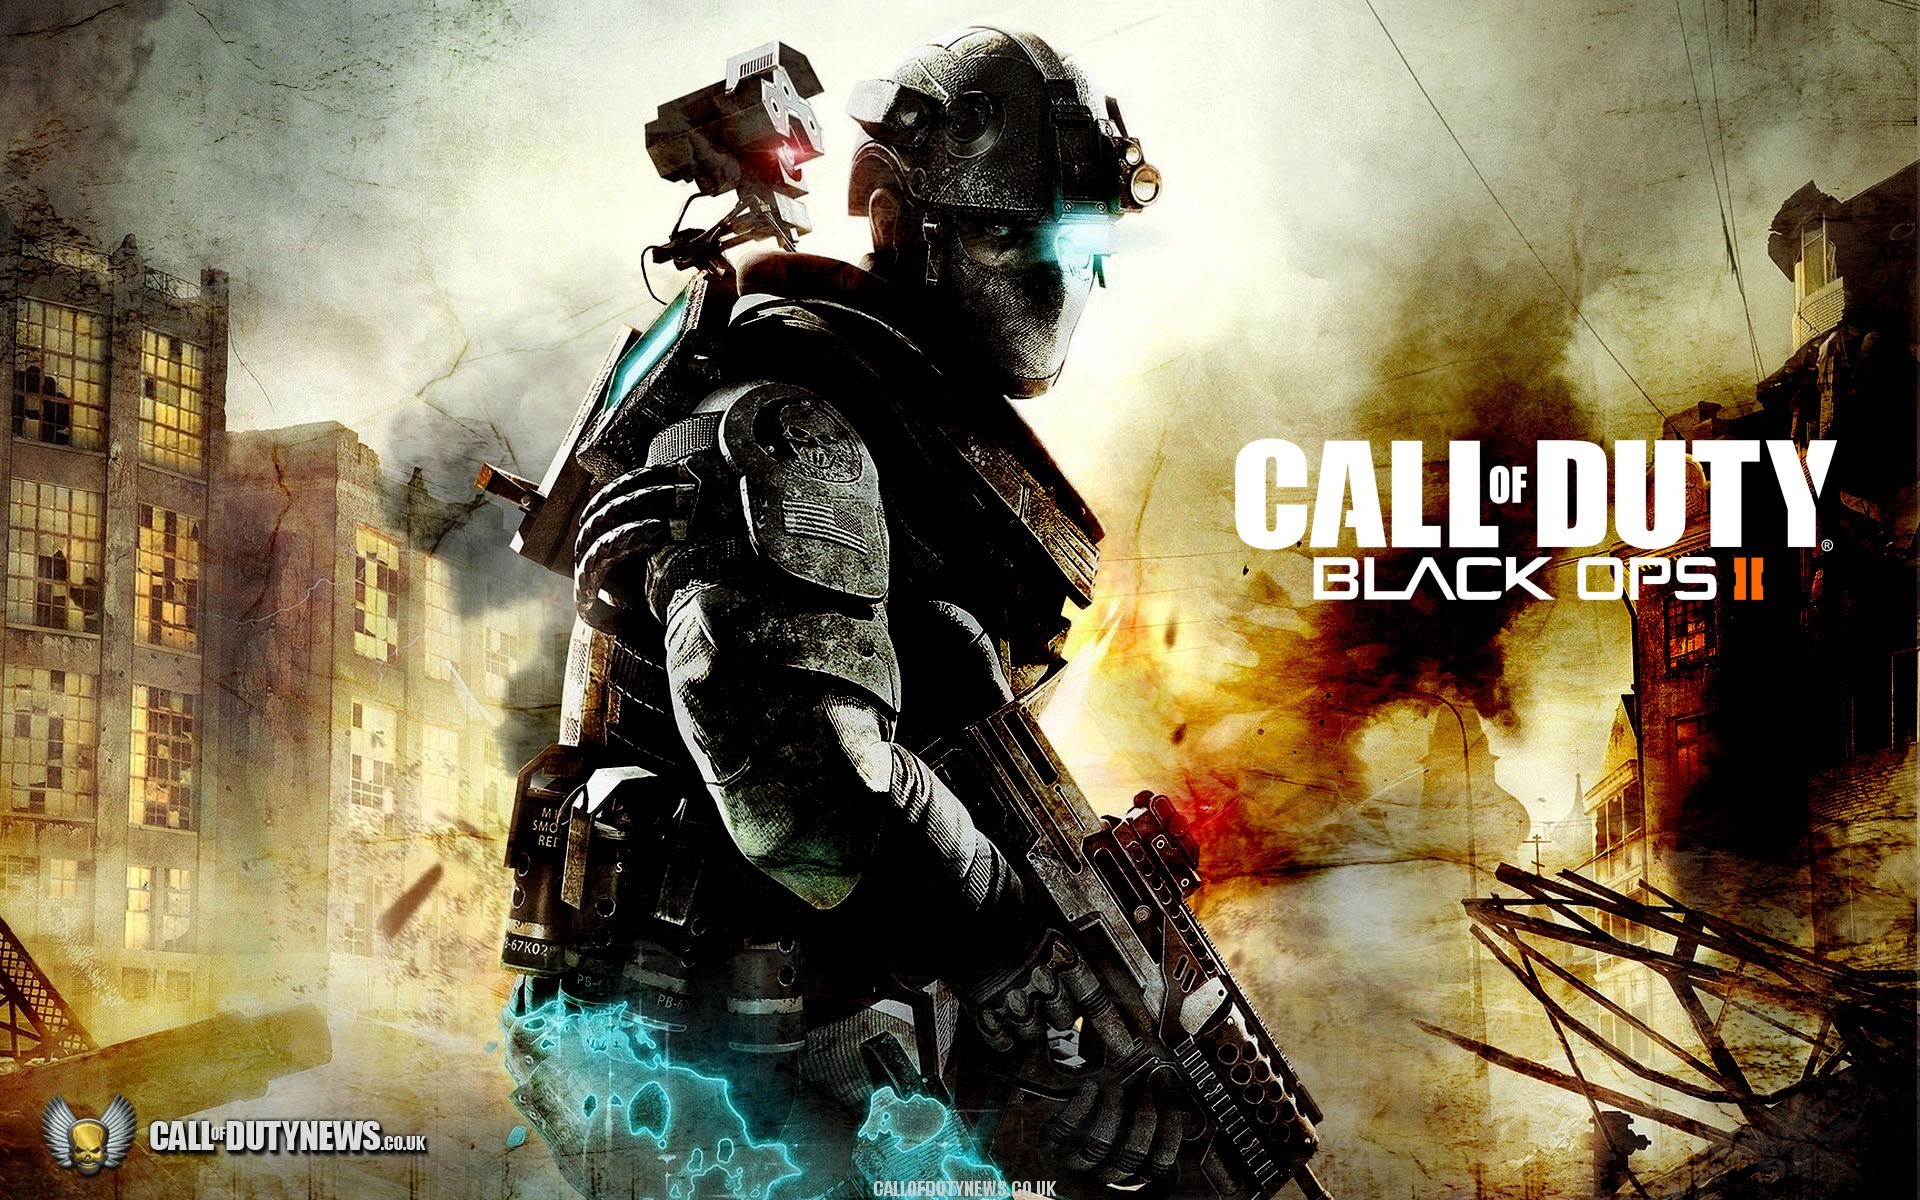 Black ops wallpapers group ãâ call of duty black ops wallpapers